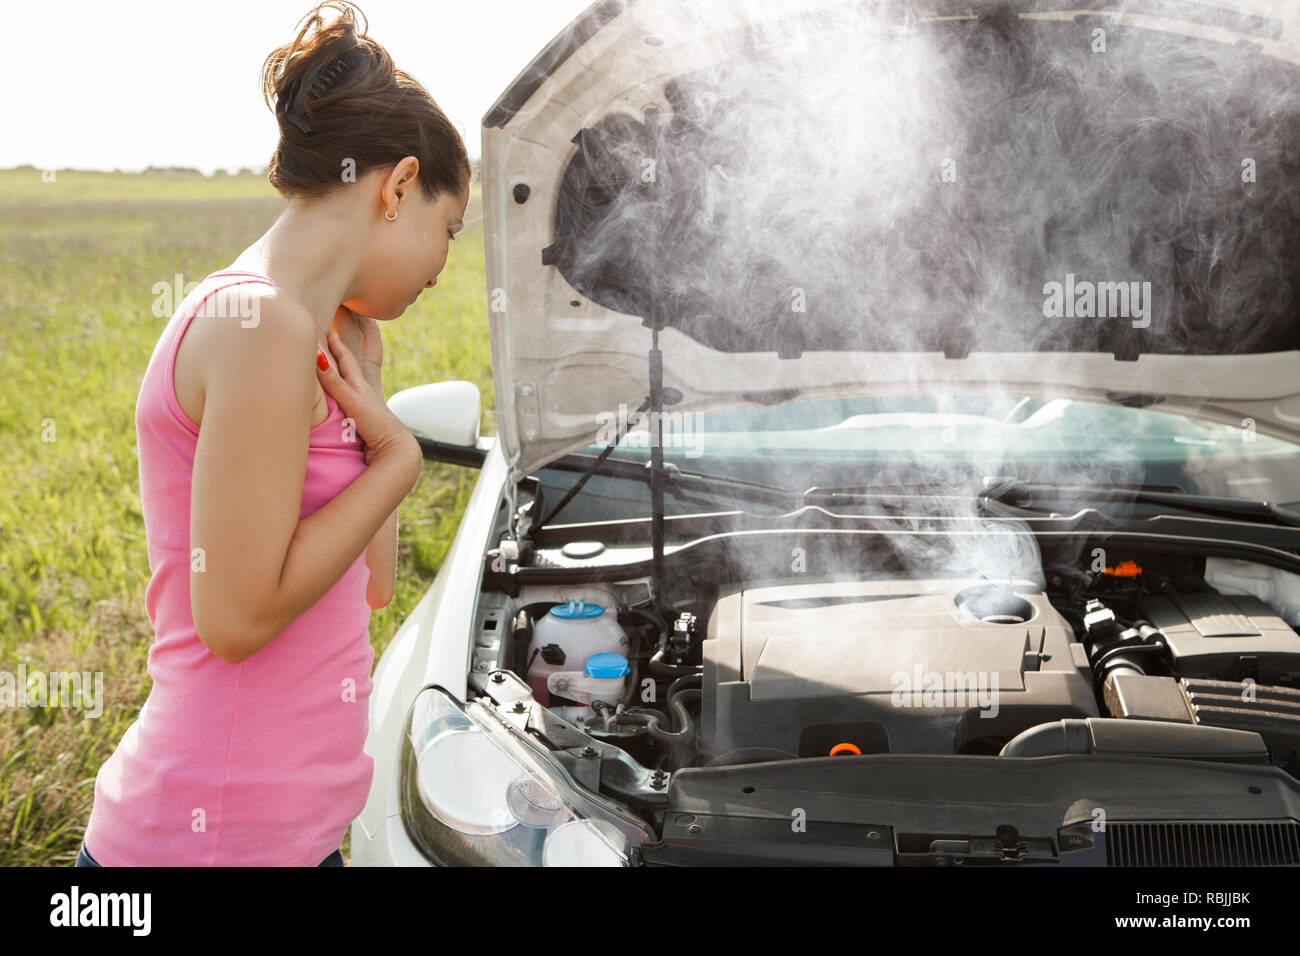 Side View Of A Sad Young Woman Looking At Broken Down Car Engine Stock Photo